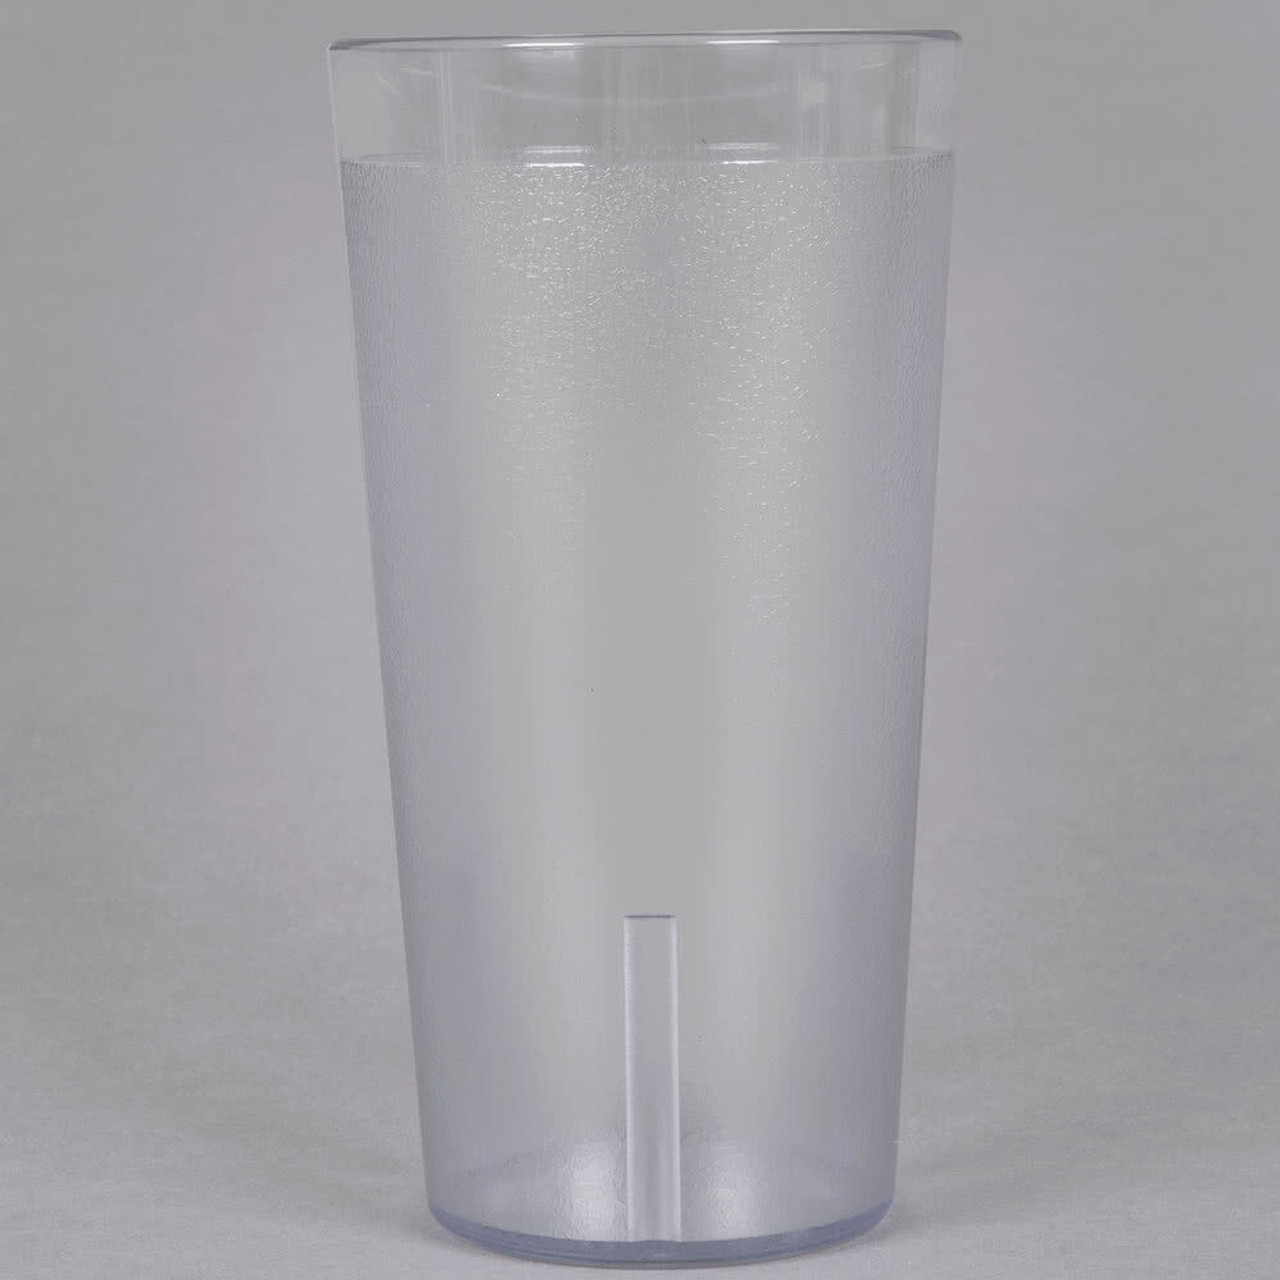 96 PACK 12 Oz Red Pebbled Plastic Tumbler Commercial Restaurant Cup Glass Case 